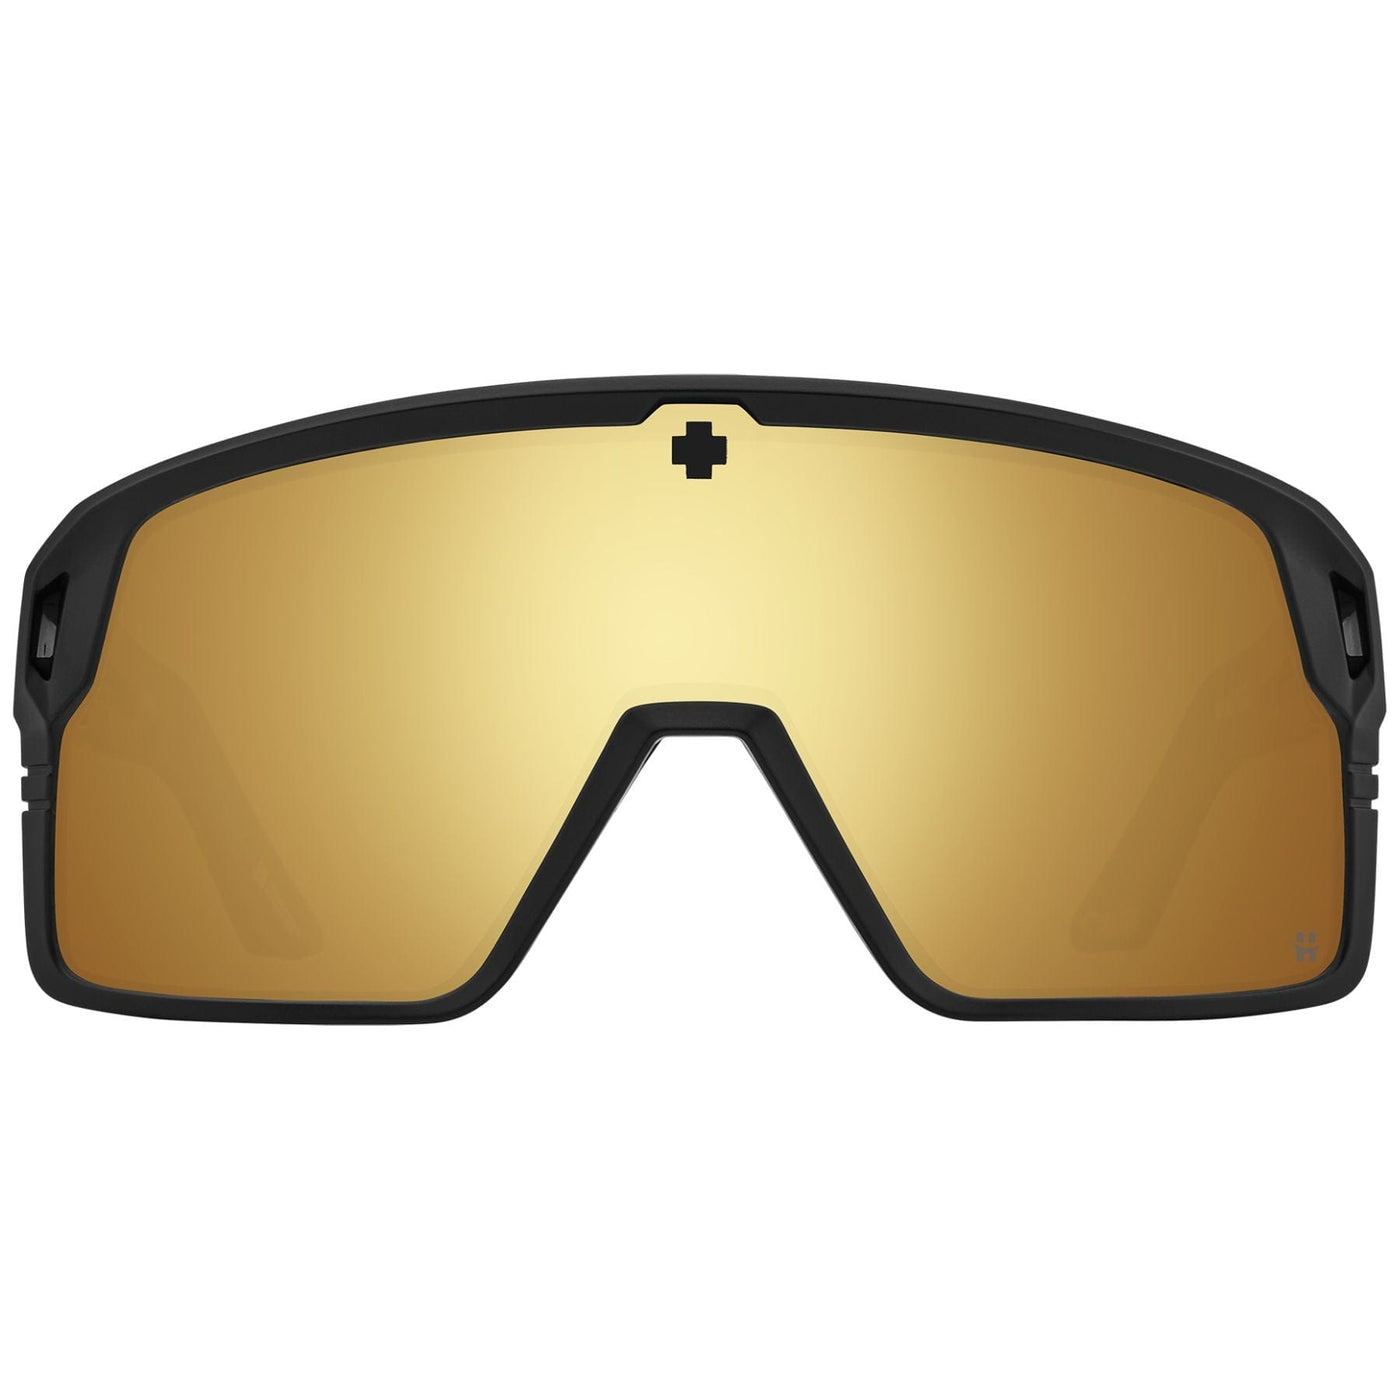 gold large mirrored sunglasses